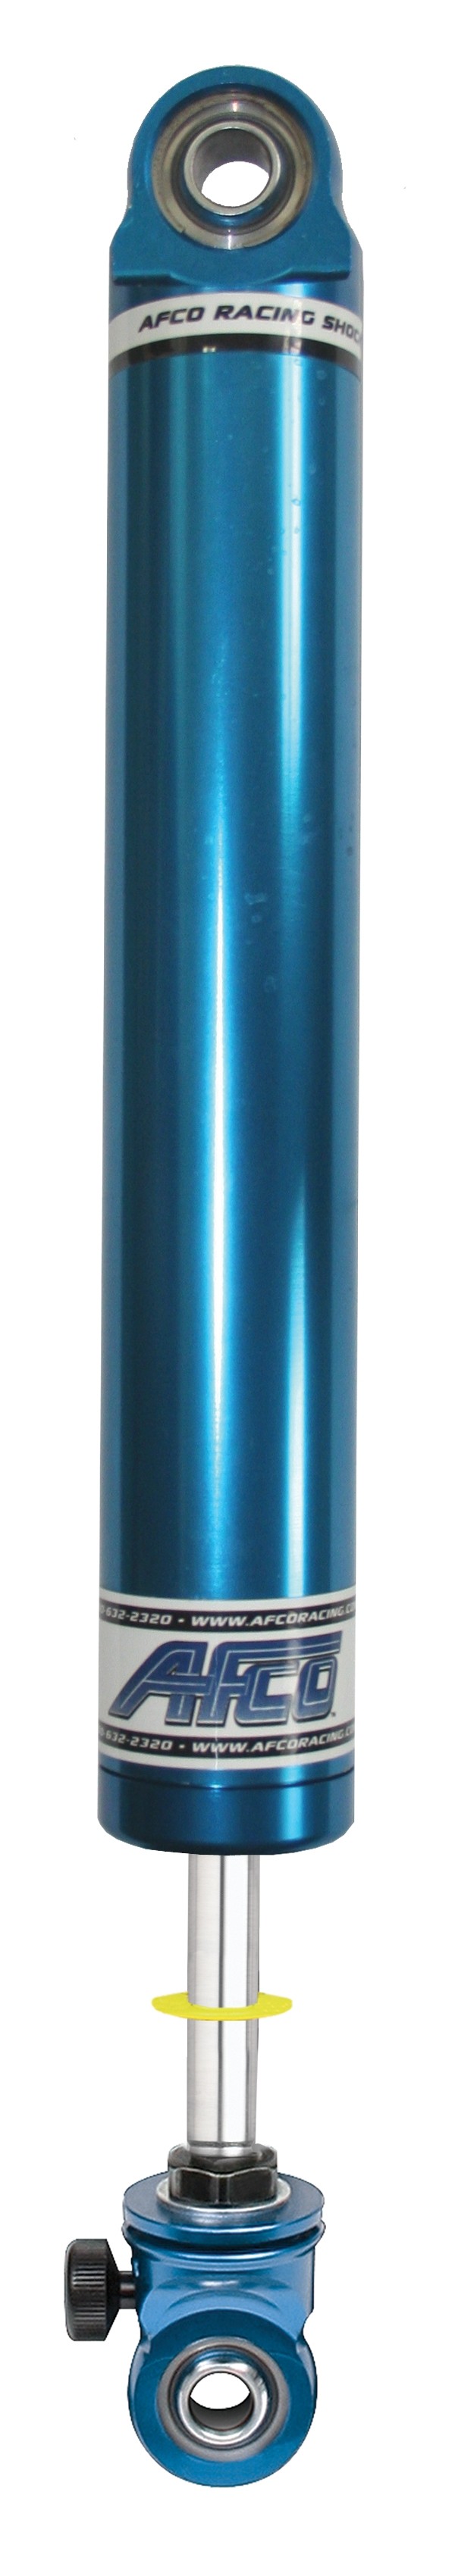 Aluminum Shock Twin Tube 16 Series Small Body 6 Inch Comp 5/Reb 4-8 Smooth